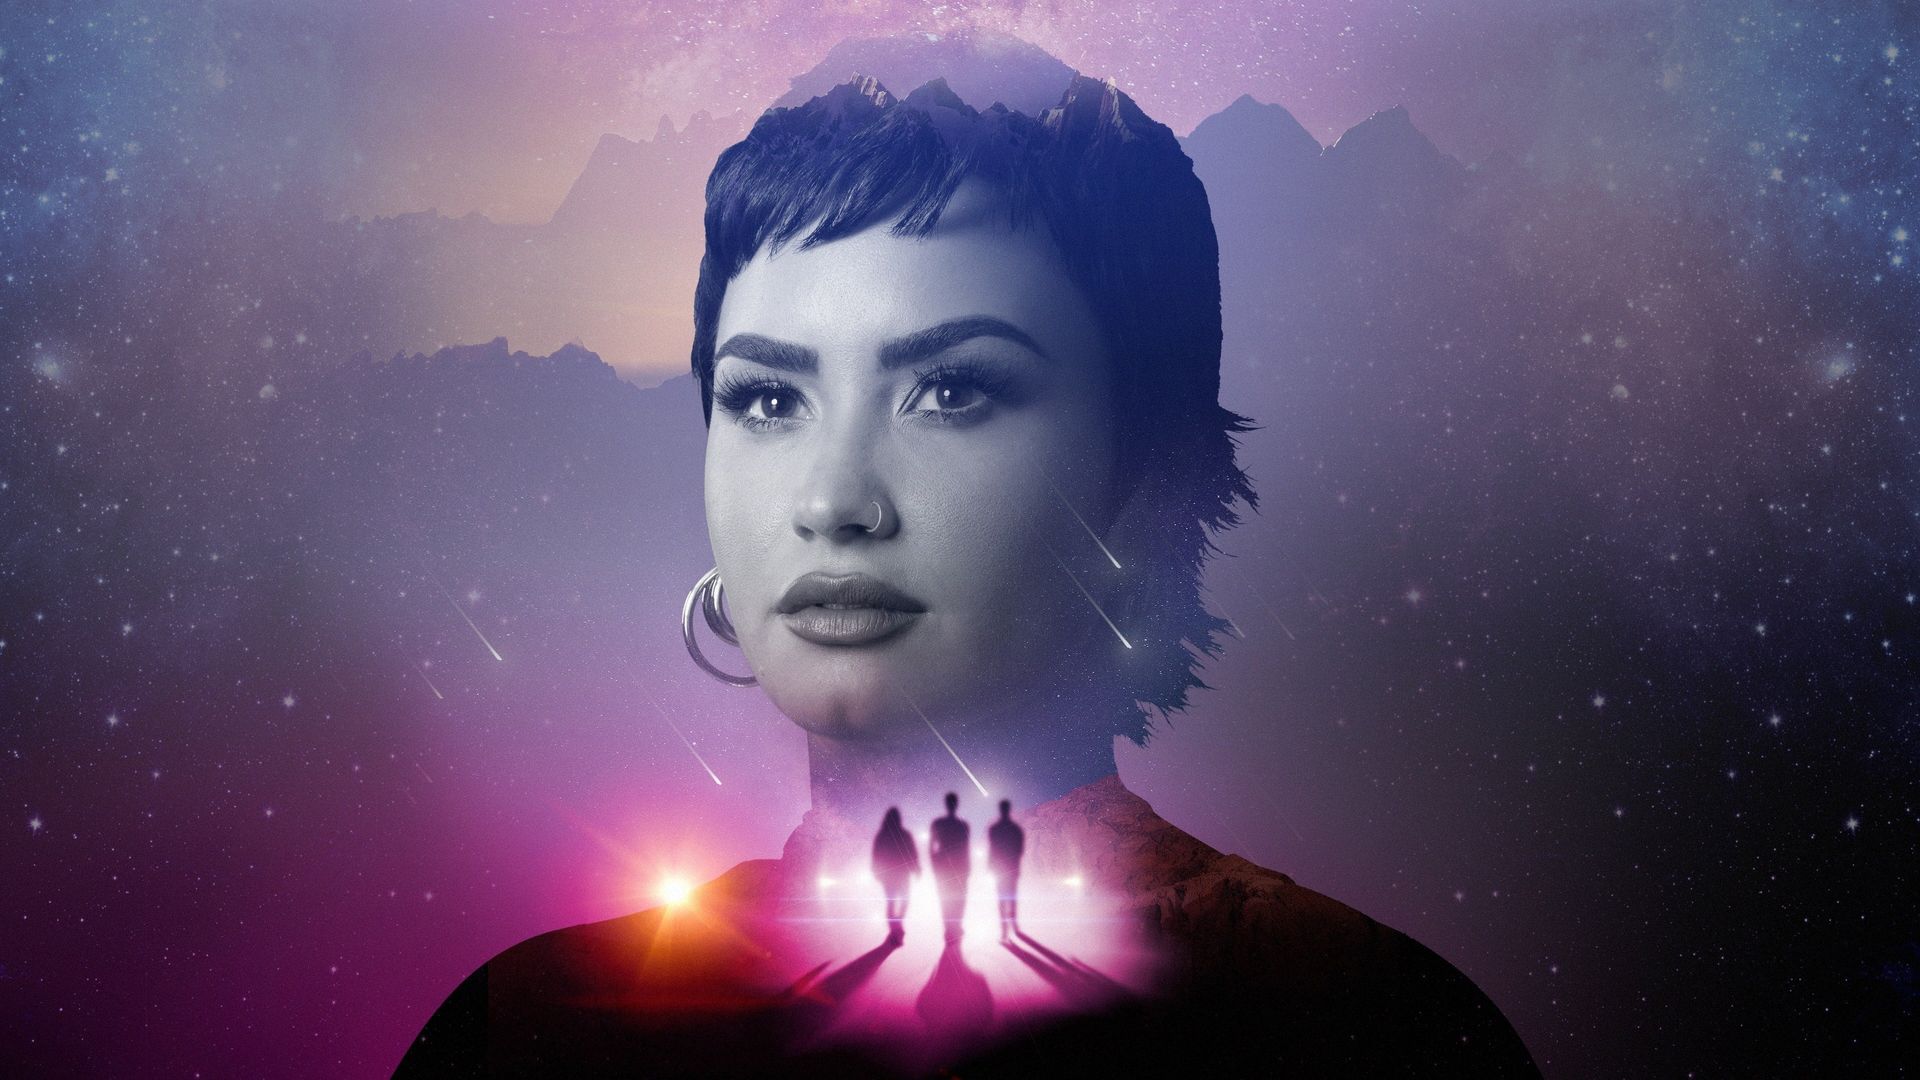 Unidentified with Demi Lovato background